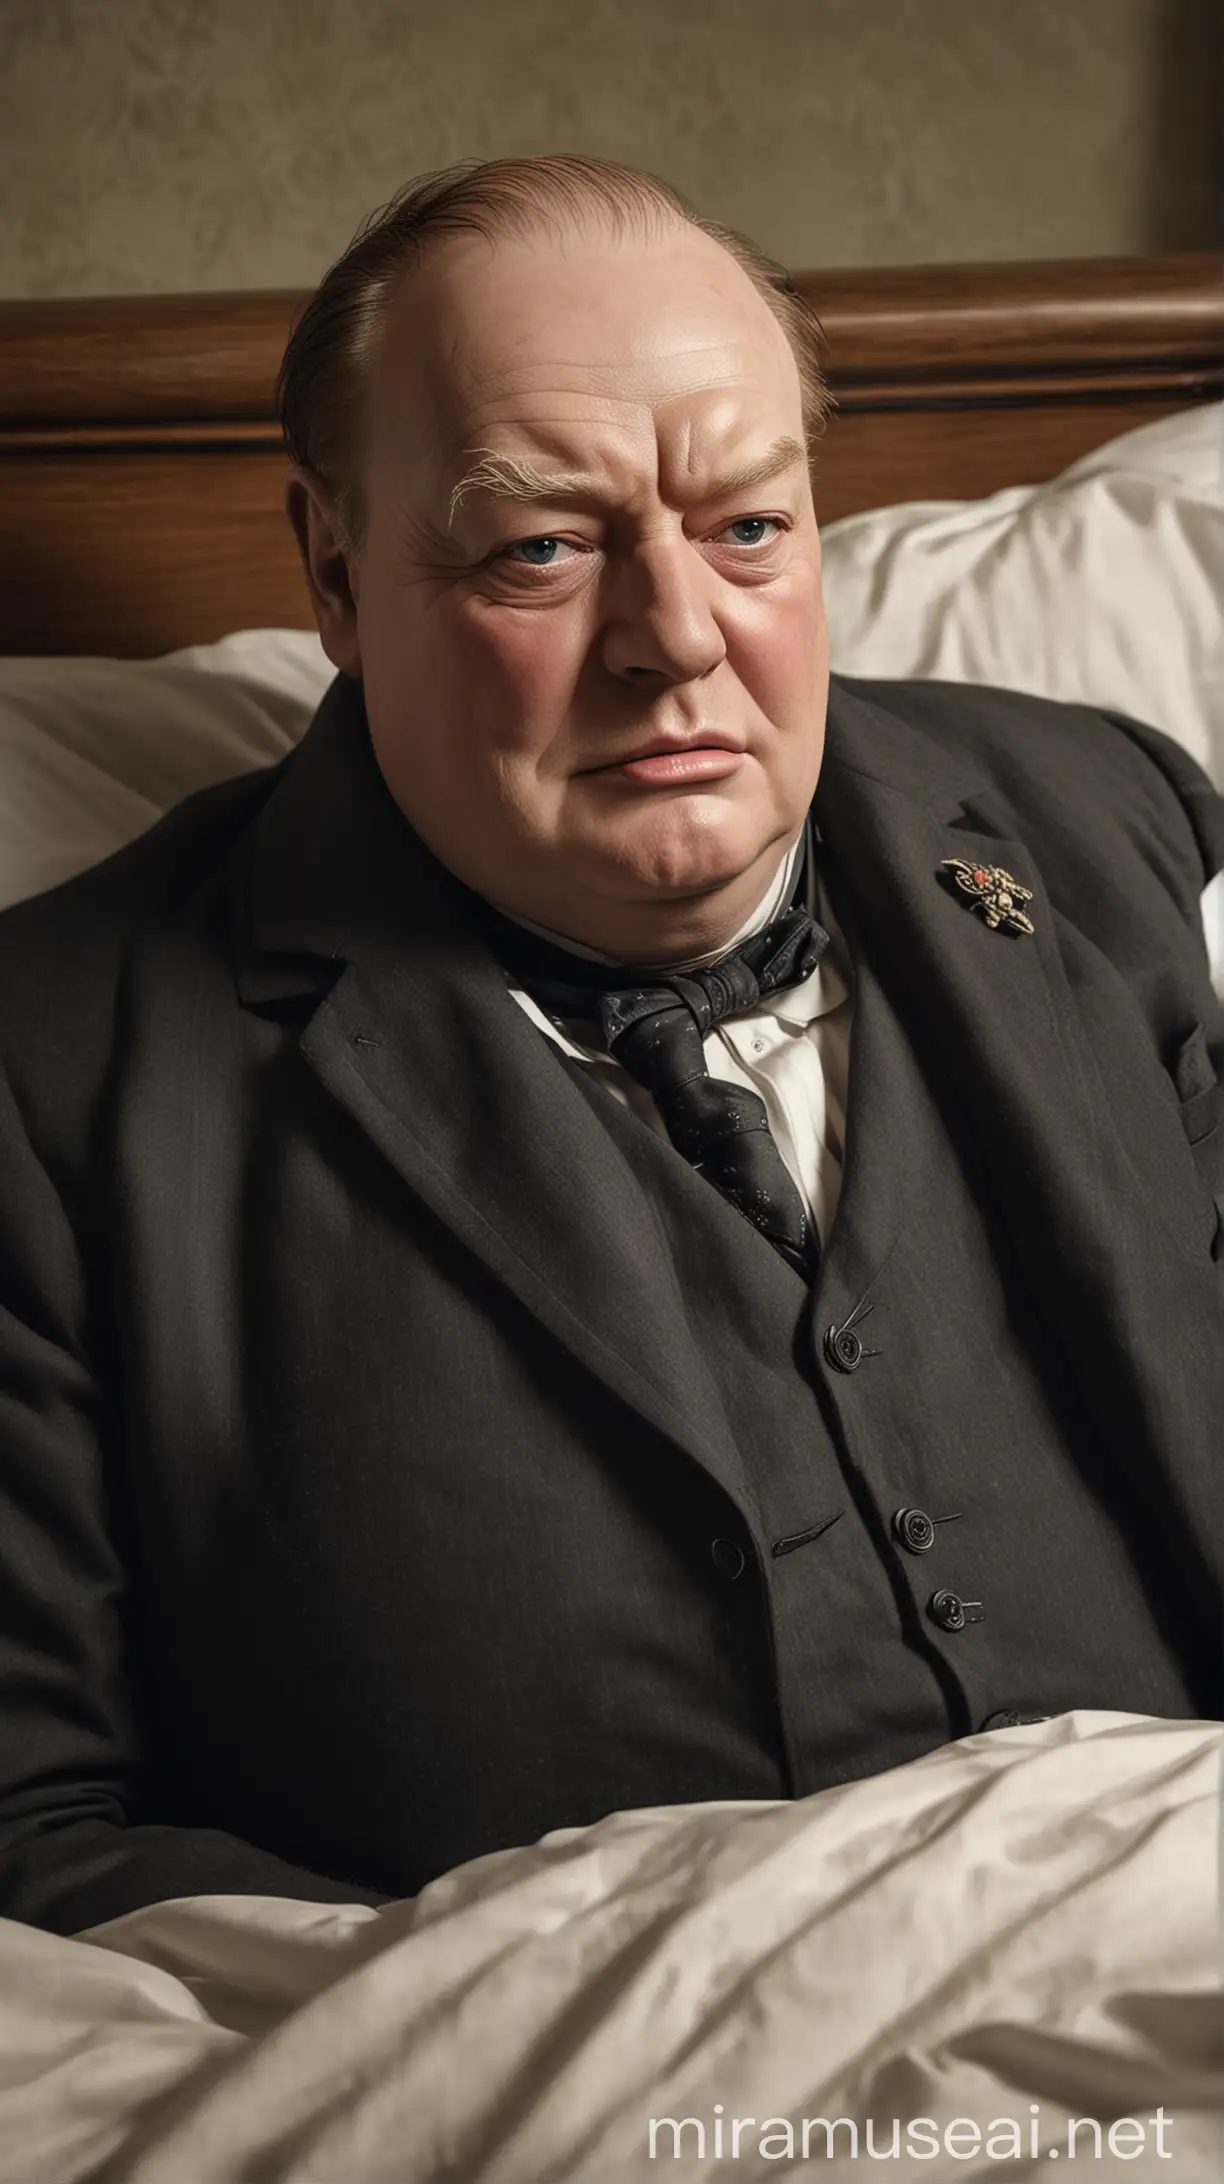 Sir Winston Churchill Delivering Final Words with a Smirk in HyperRealistic Depiction